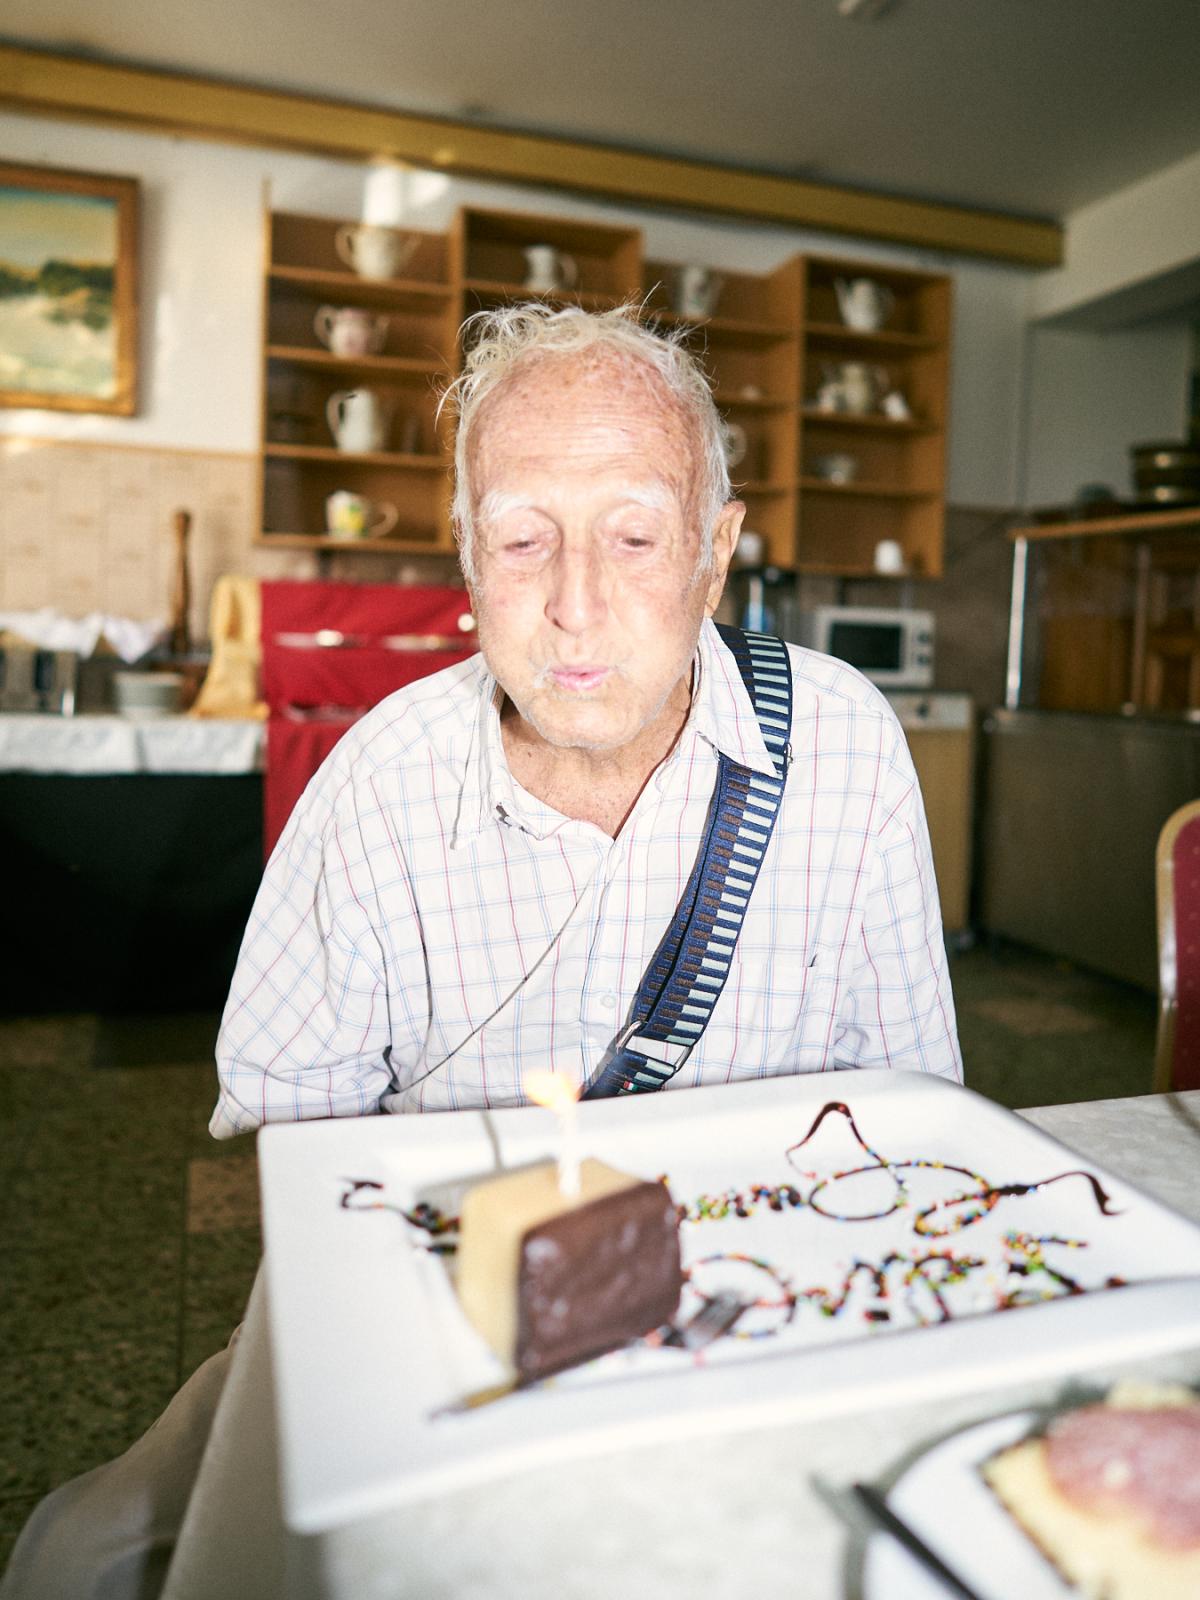 𝐈𝐈. The brief glimpse of a settler's dream - Carlos blowing a candle for his 91st birthday. The cake...